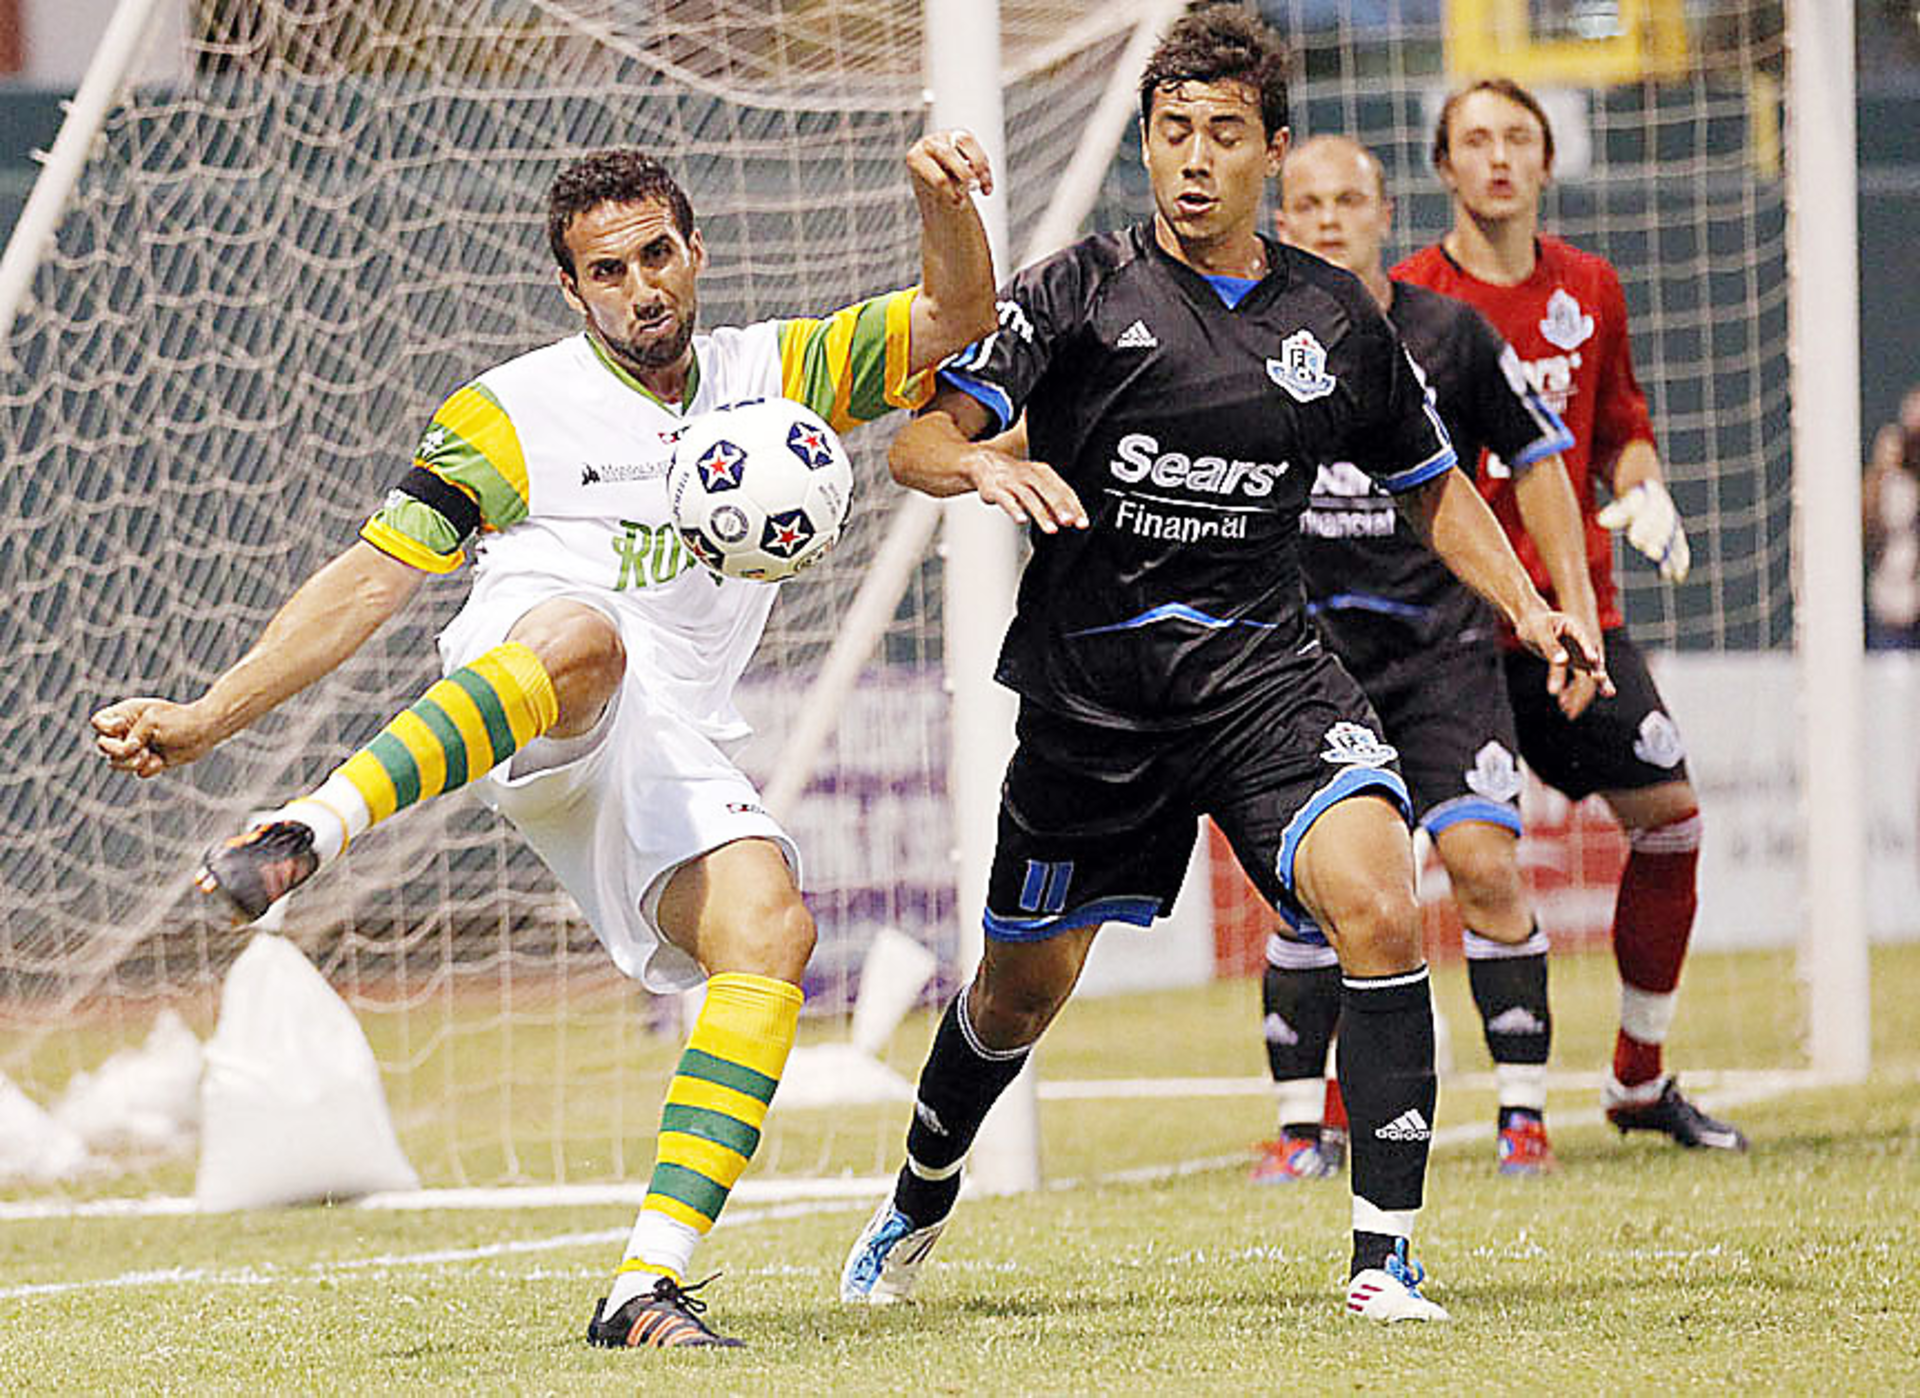 Back with the old, anew: The Tampa Bay Rowdies